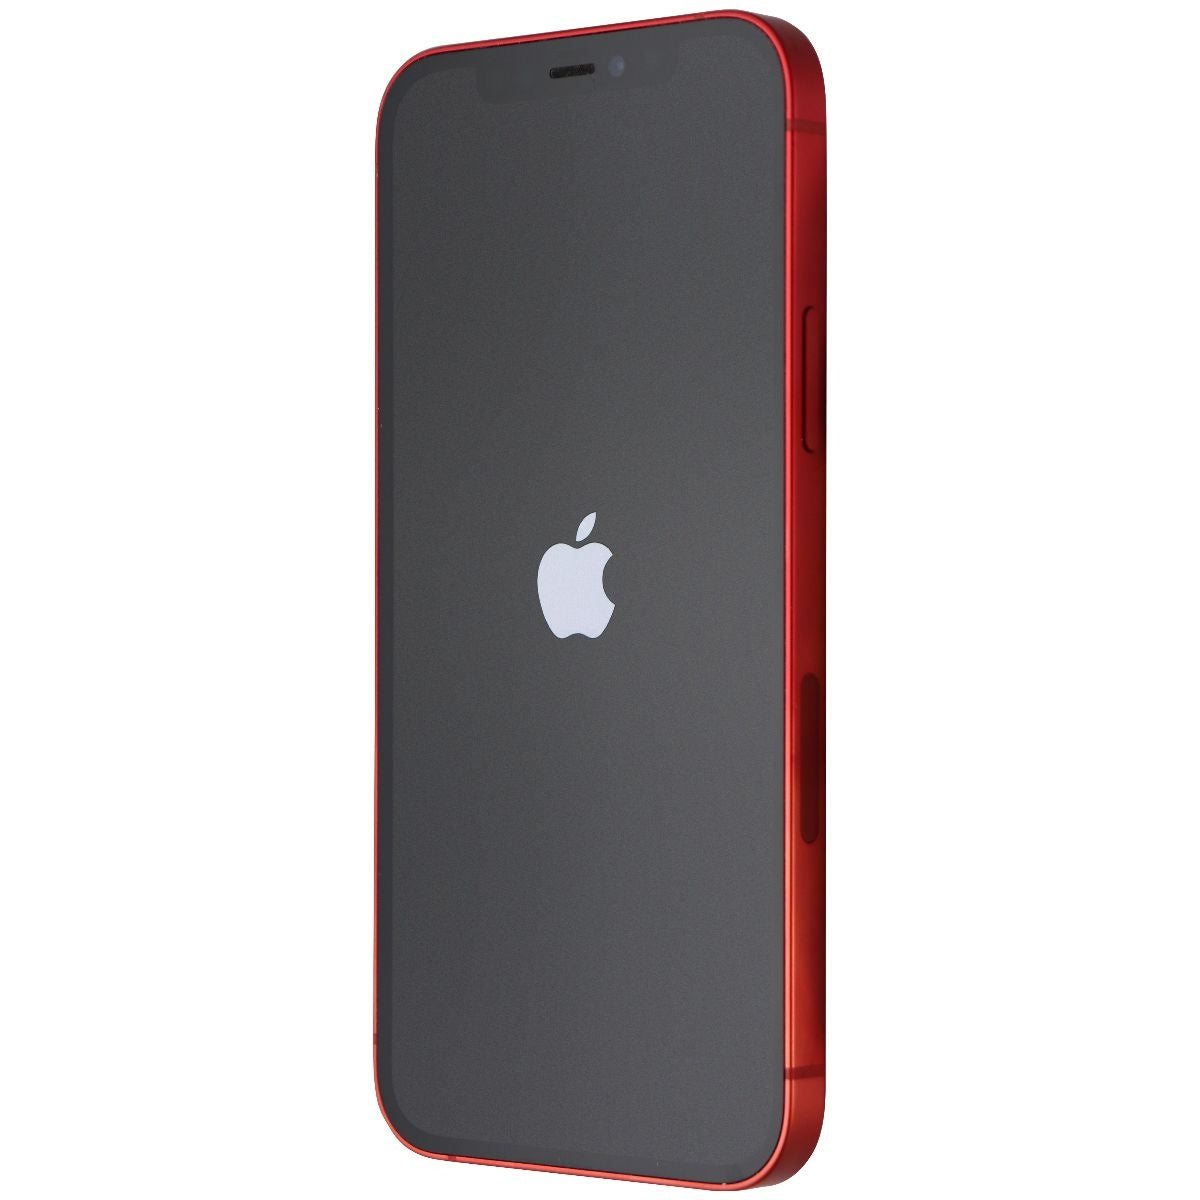 Apple iPhone 12 (6.1-inch) (A2172) Spectrum Mobile ONLY - 64GB / (Product) RED Cell Phones & Smartphones Apple    - Simple Cell Bulk Wholesale Pricing - USA Seller